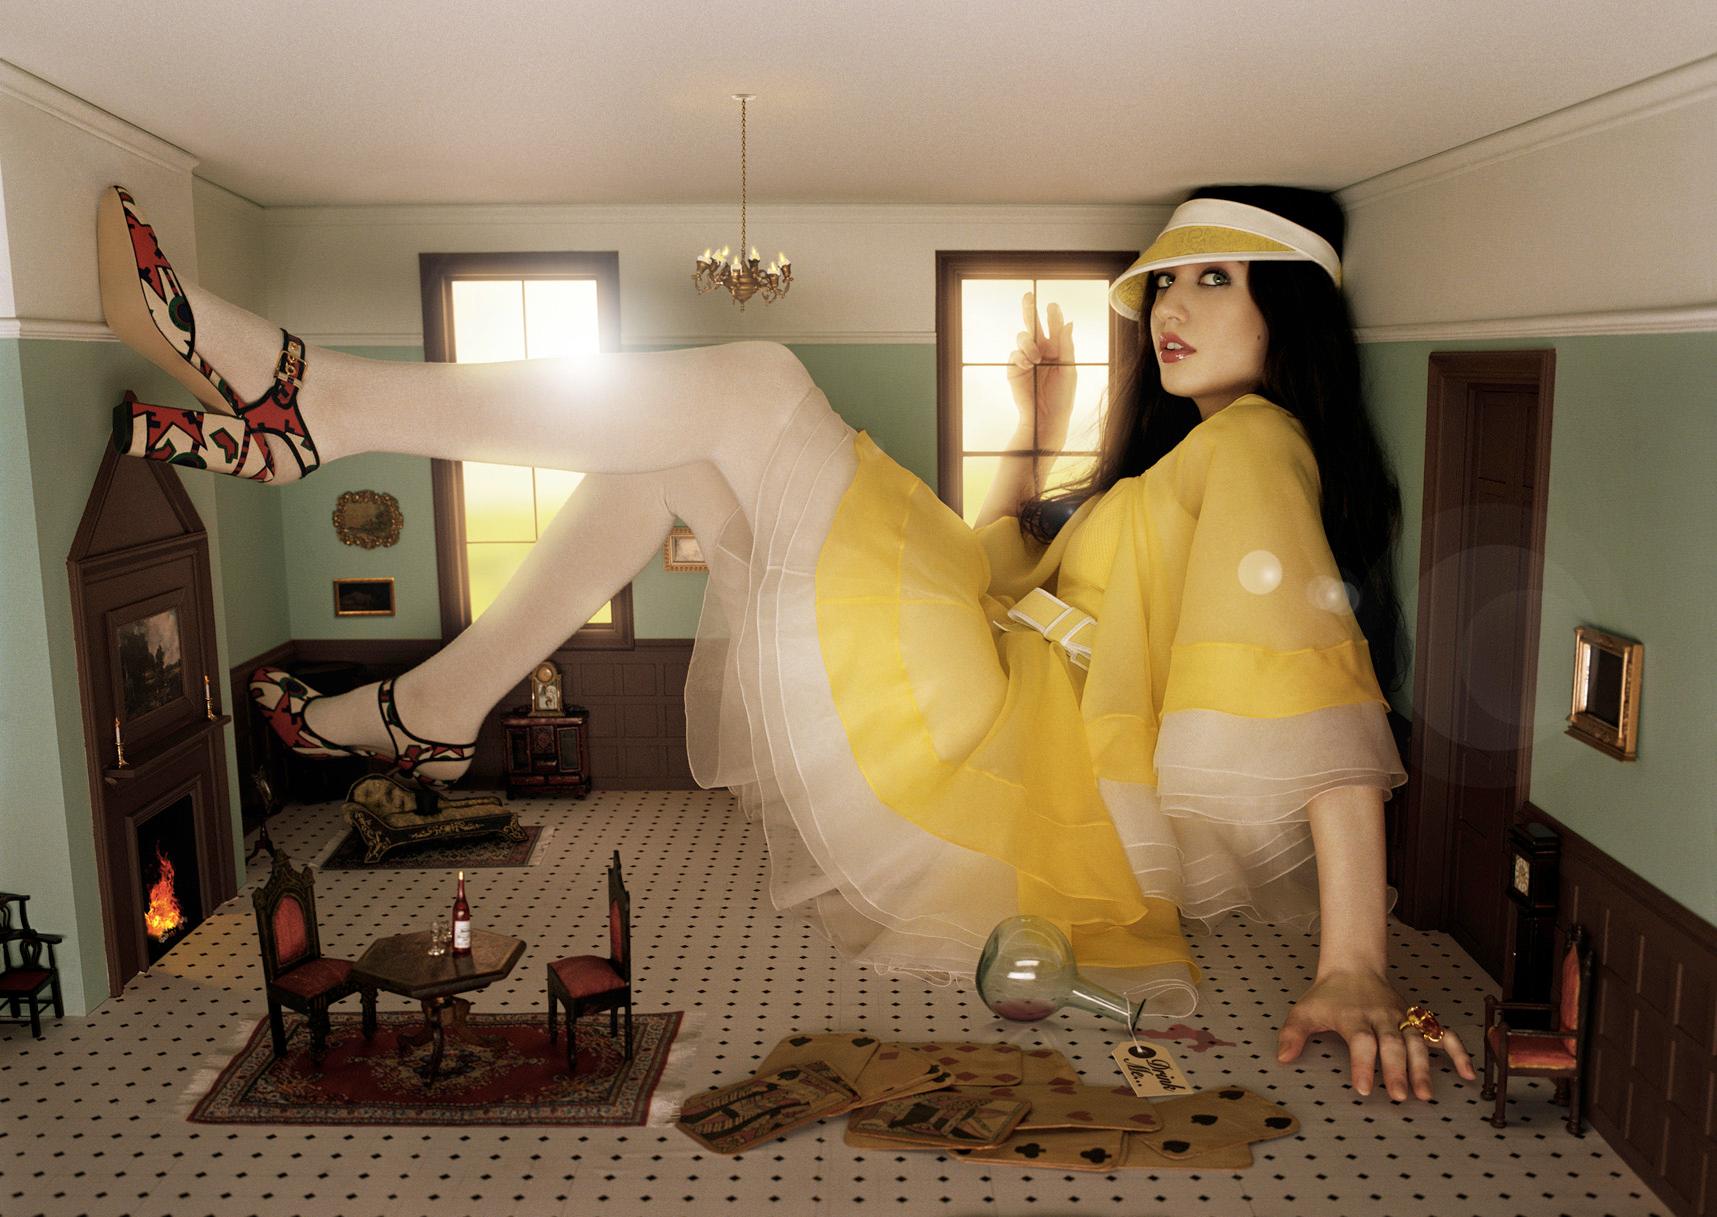 Lorenzo Agius - Lizzy Jagger, dolls house, colour, photography, 48x60 in